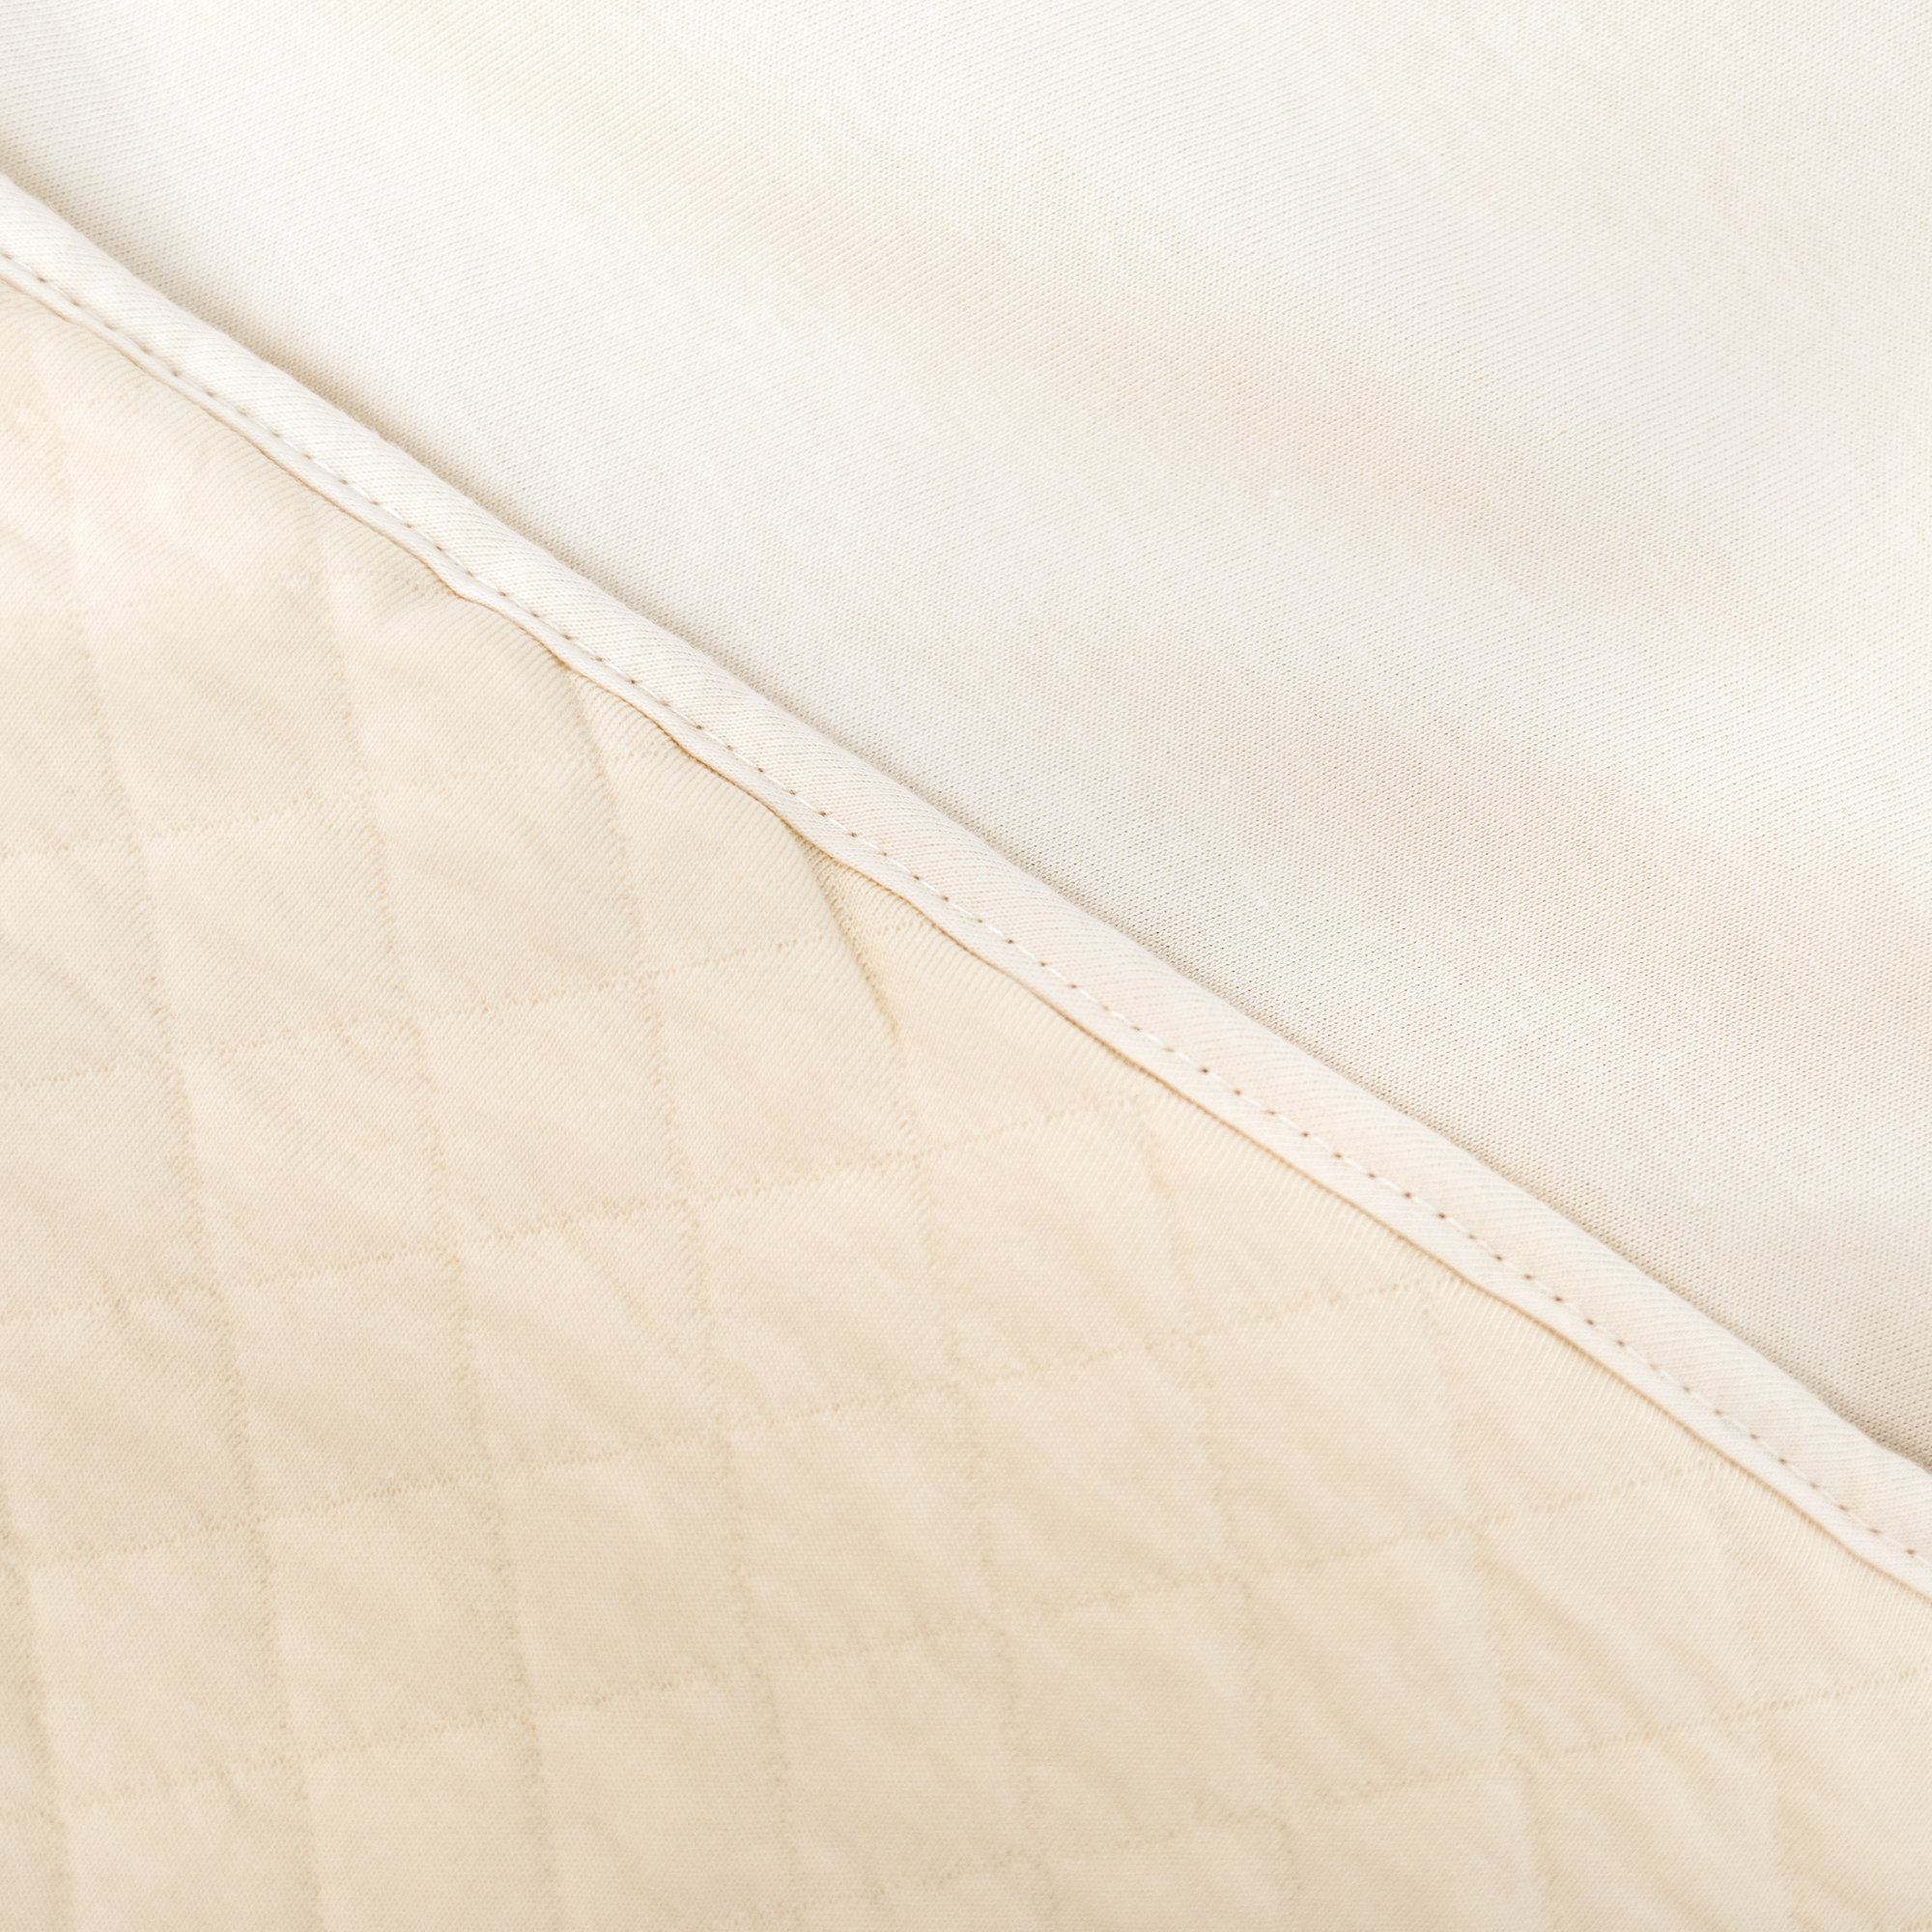 Manta Pady quilted + jersey 75x100cm QUILT Cream tog 3[BEDDING]